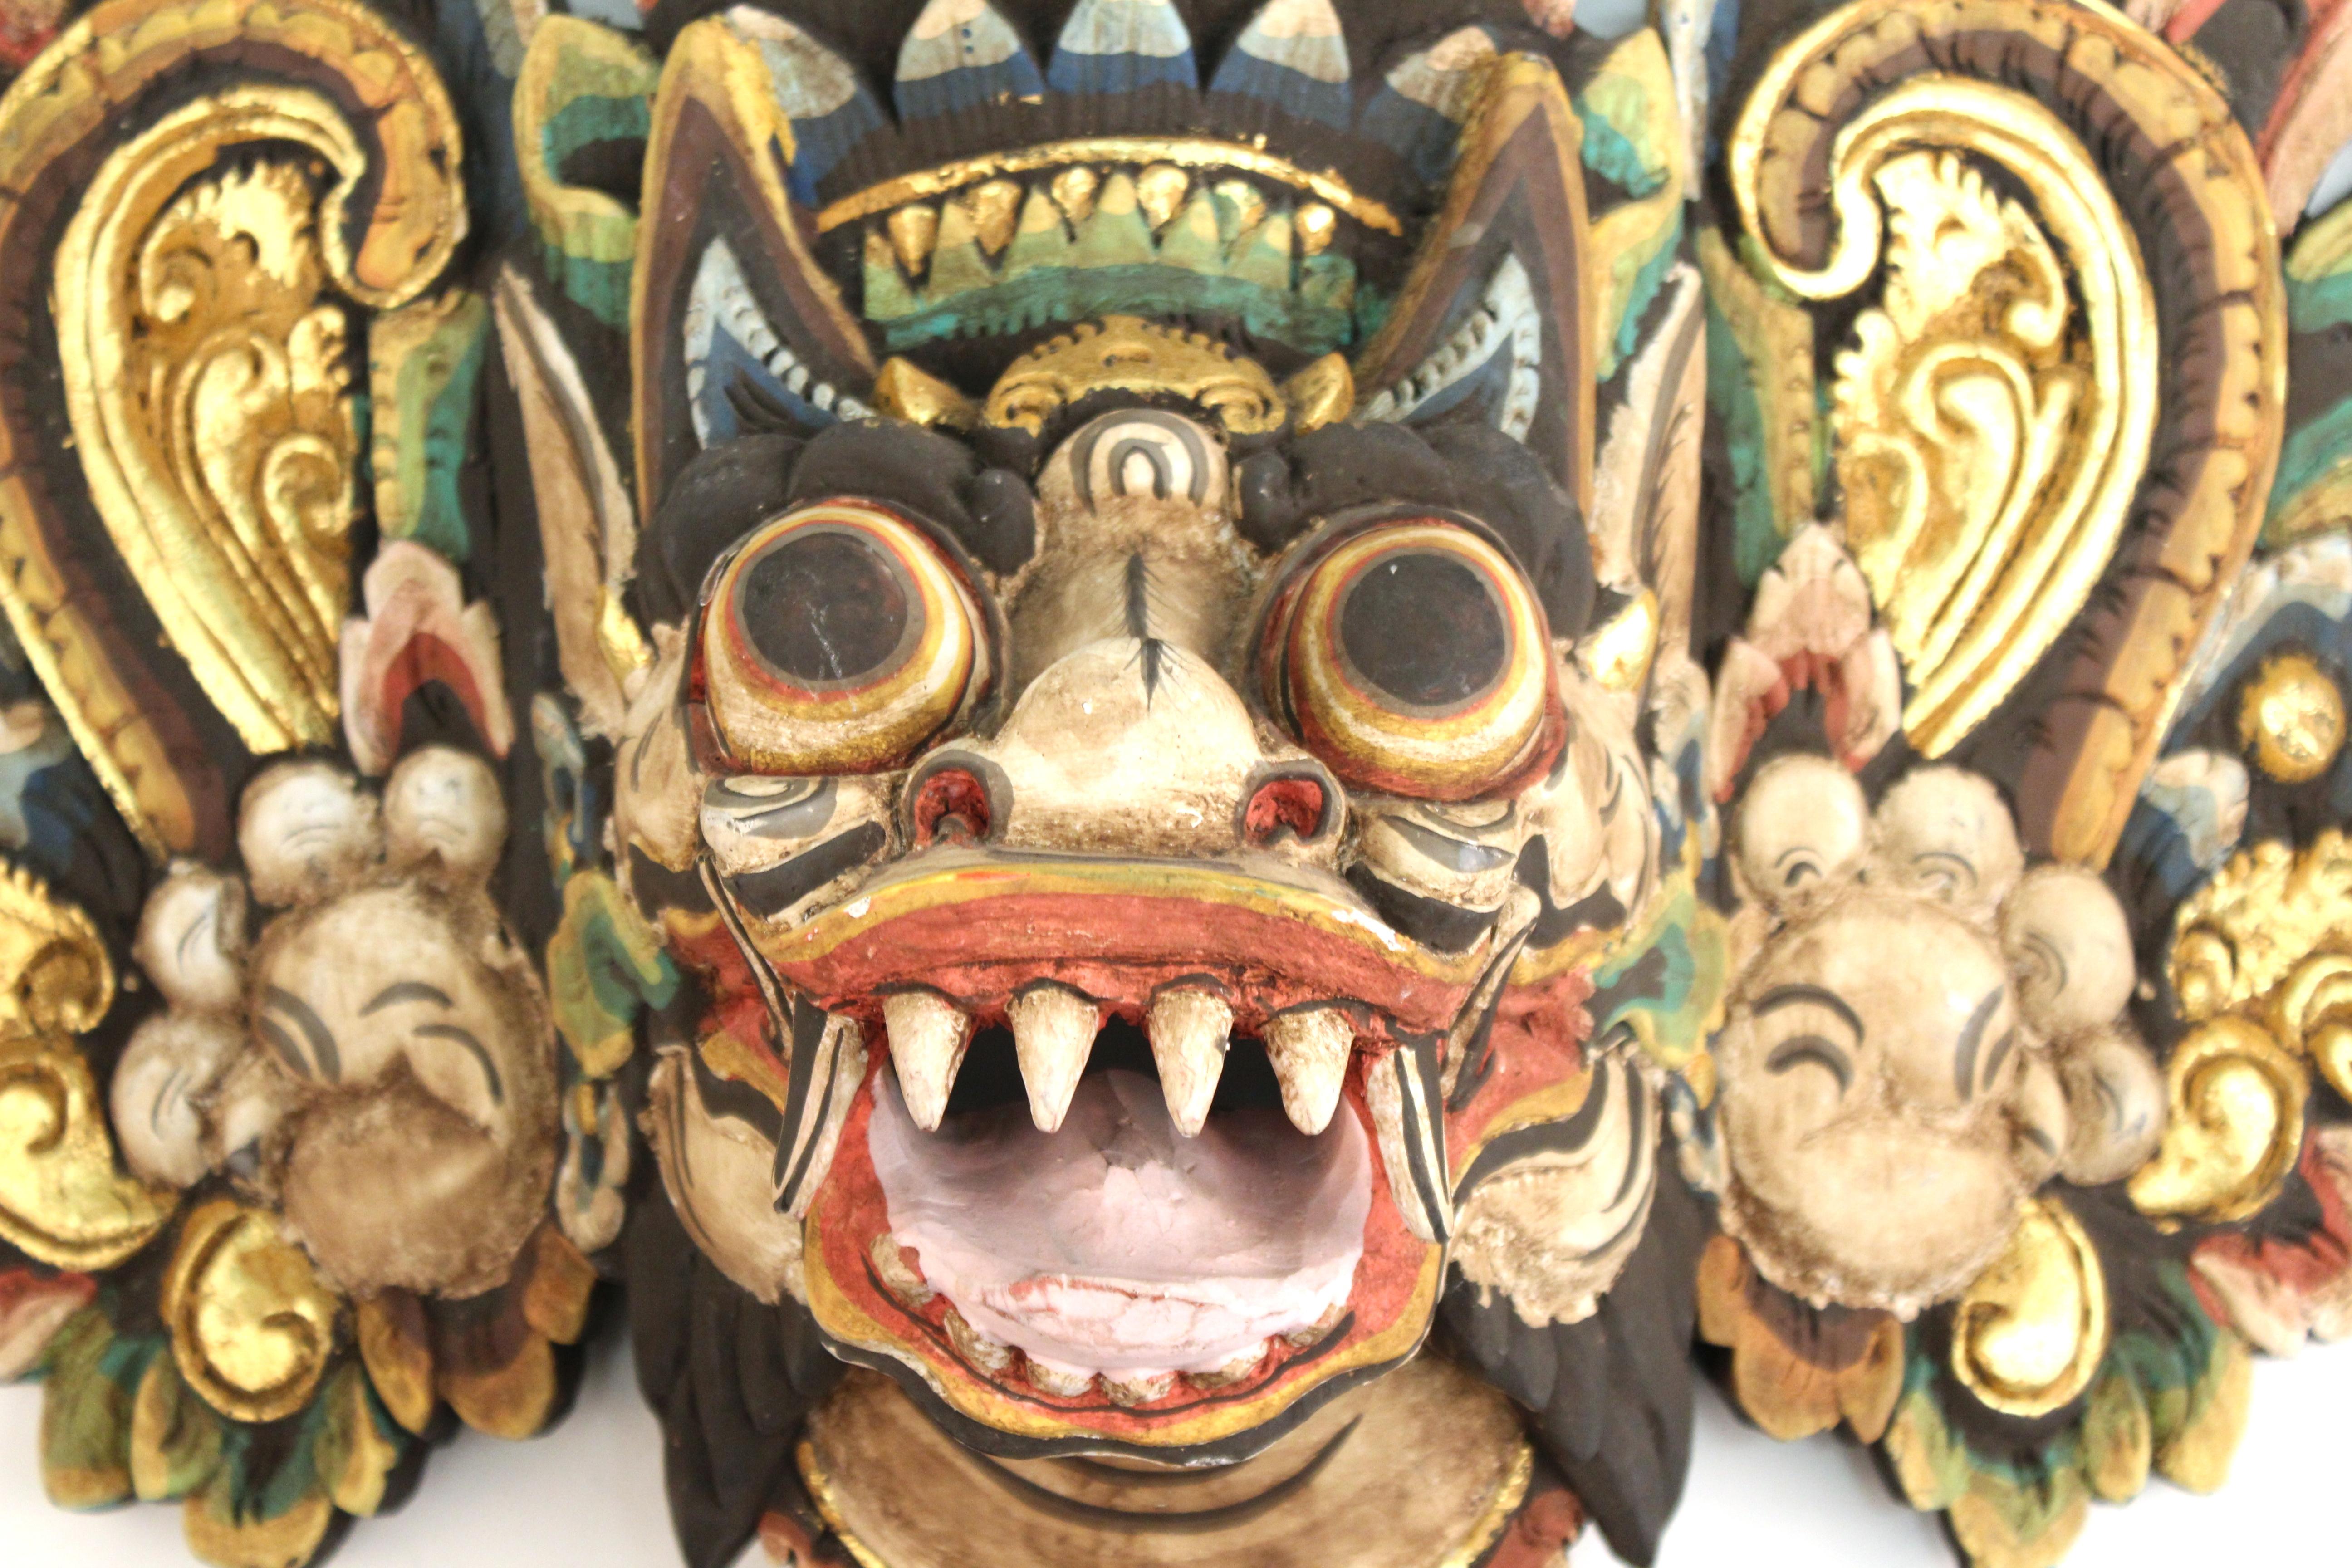 Balinese Barong carved and hand painted wood dance mask of an ornate colorful mythological creature. The piece is in good vintage condition and was produced during the 20th century. Some age-appropriate wear.